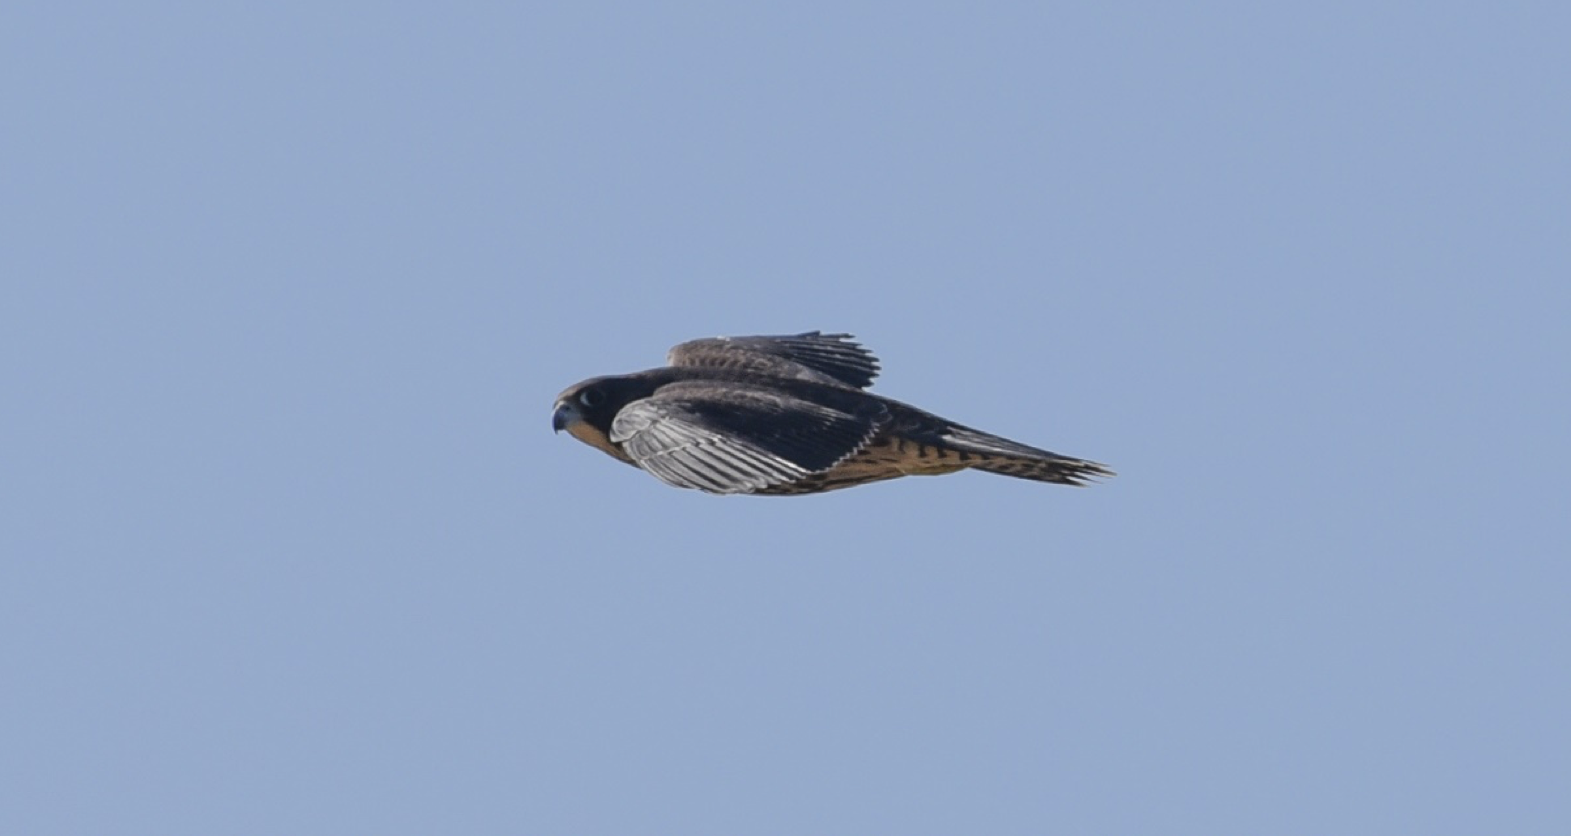 One of the juvenile falcon during a mid-June 2016 flyby